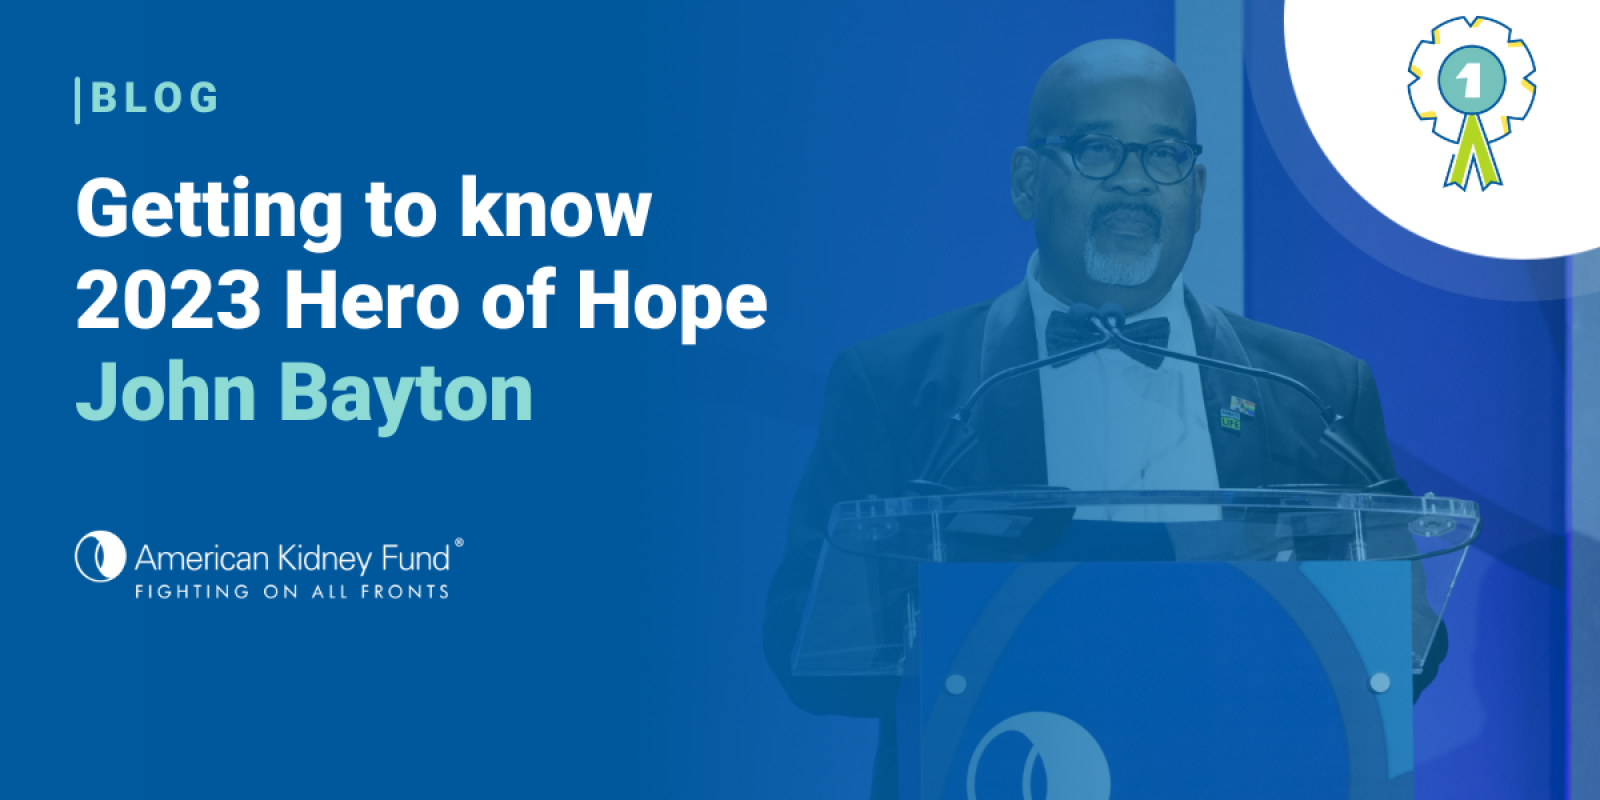 John Bayton in a tuxedo at a podium at The Hope Affair with a blue text overlay "Getting to know 2023 Hero of Hope John Bayton"